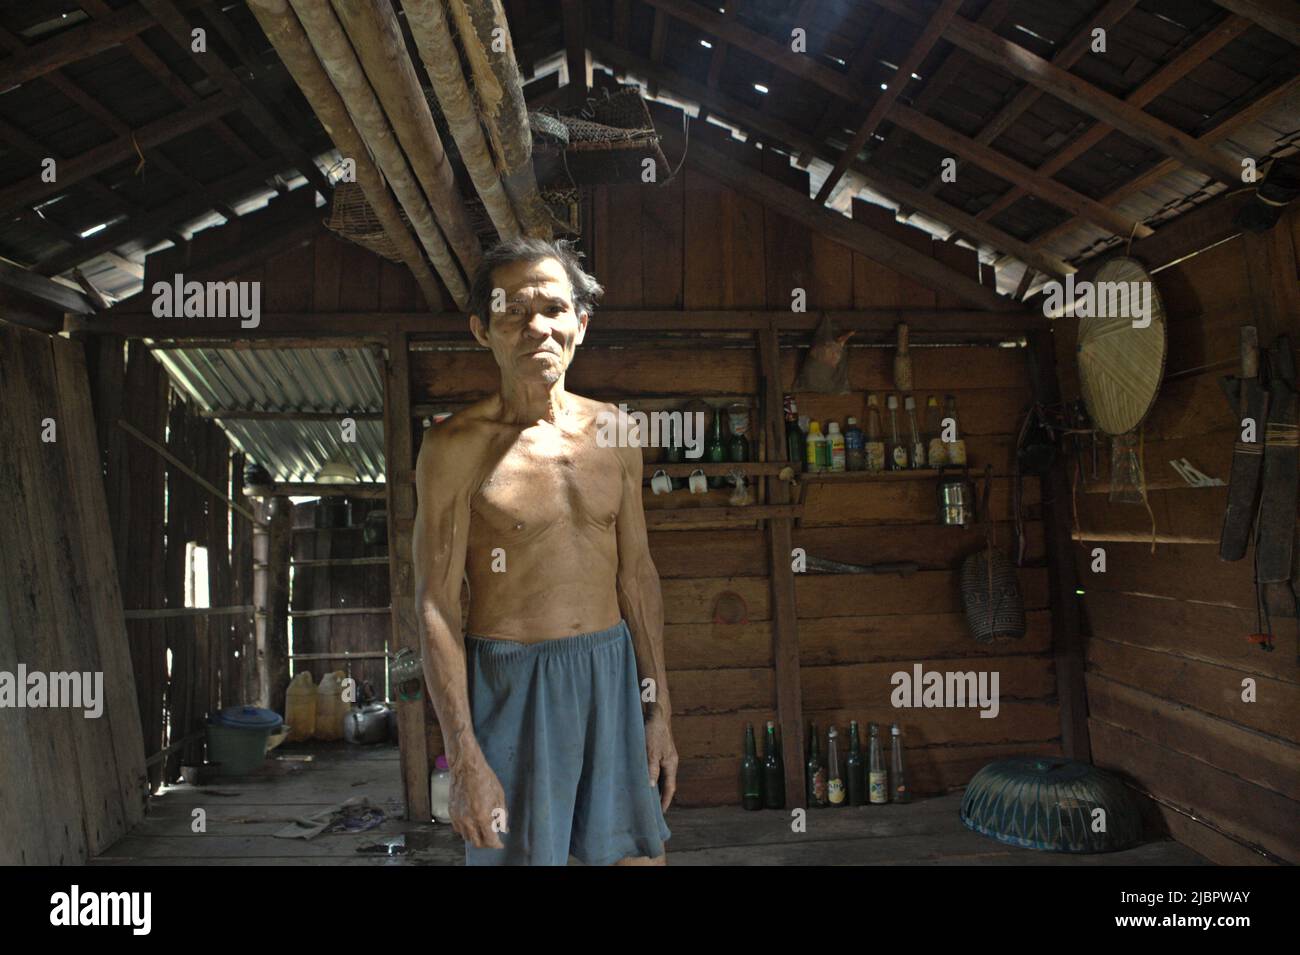 Portrait of Daniel Rajang, former tumenggung (traditional chief) of Orung Da'an Dayak community, at his farming hut in Nanga Raun village, Kalis, Kapuas Hulu, West Kalimantan, Indonesia. The Orung Da'an community once had the longest longhouse in Kalimantan, but it was vanished after a fire accident a few decades back, he said. Stock Photo